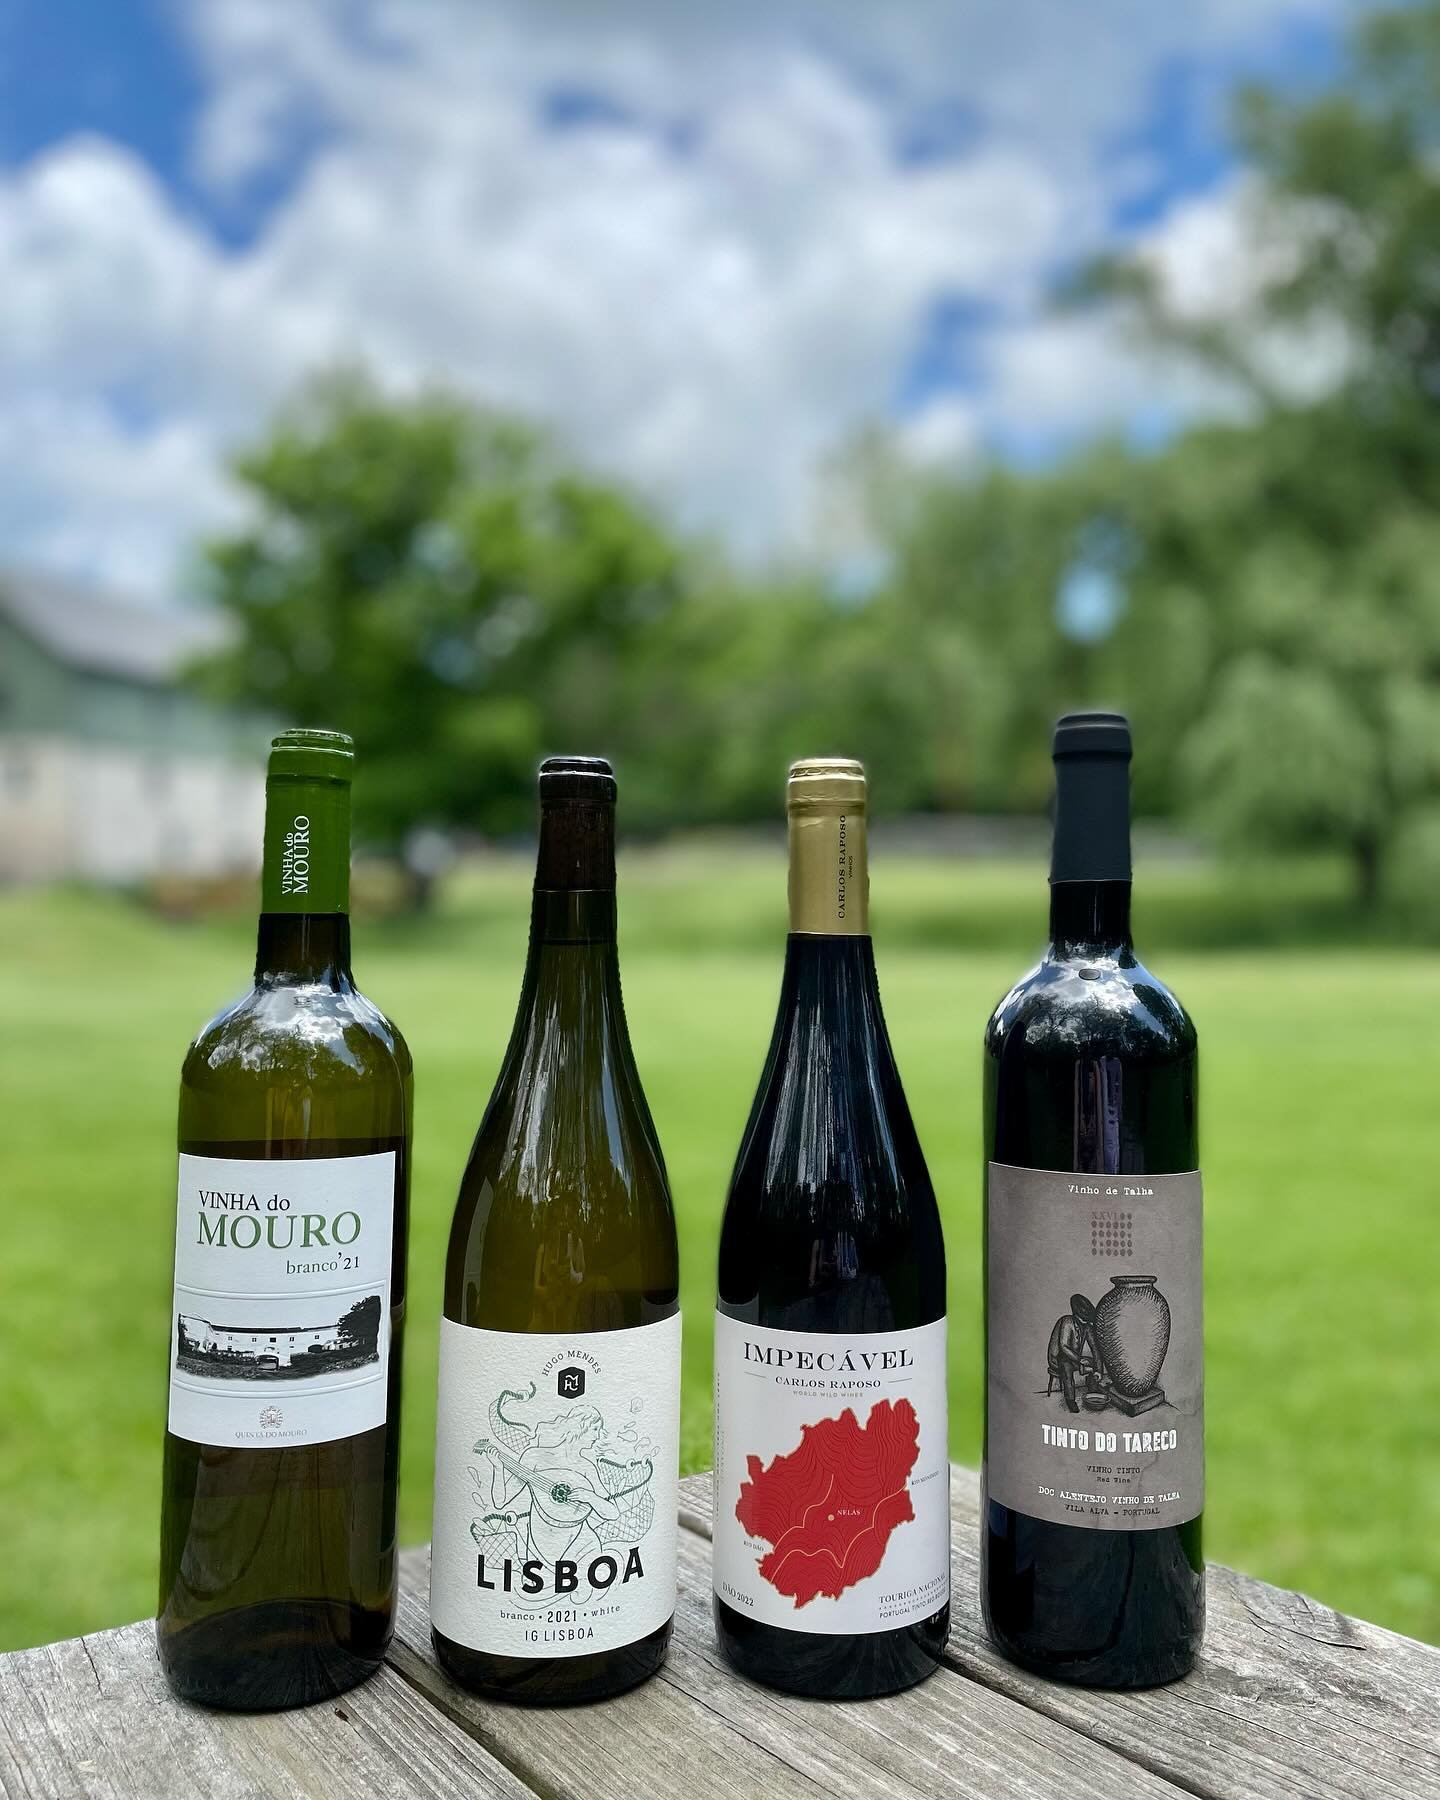 Kevin Lewis from Le Storie will be at Locke Store tomorrow pouring these delicious wines from Portugal! Stop by from 12-3pm and taste these incredible values!